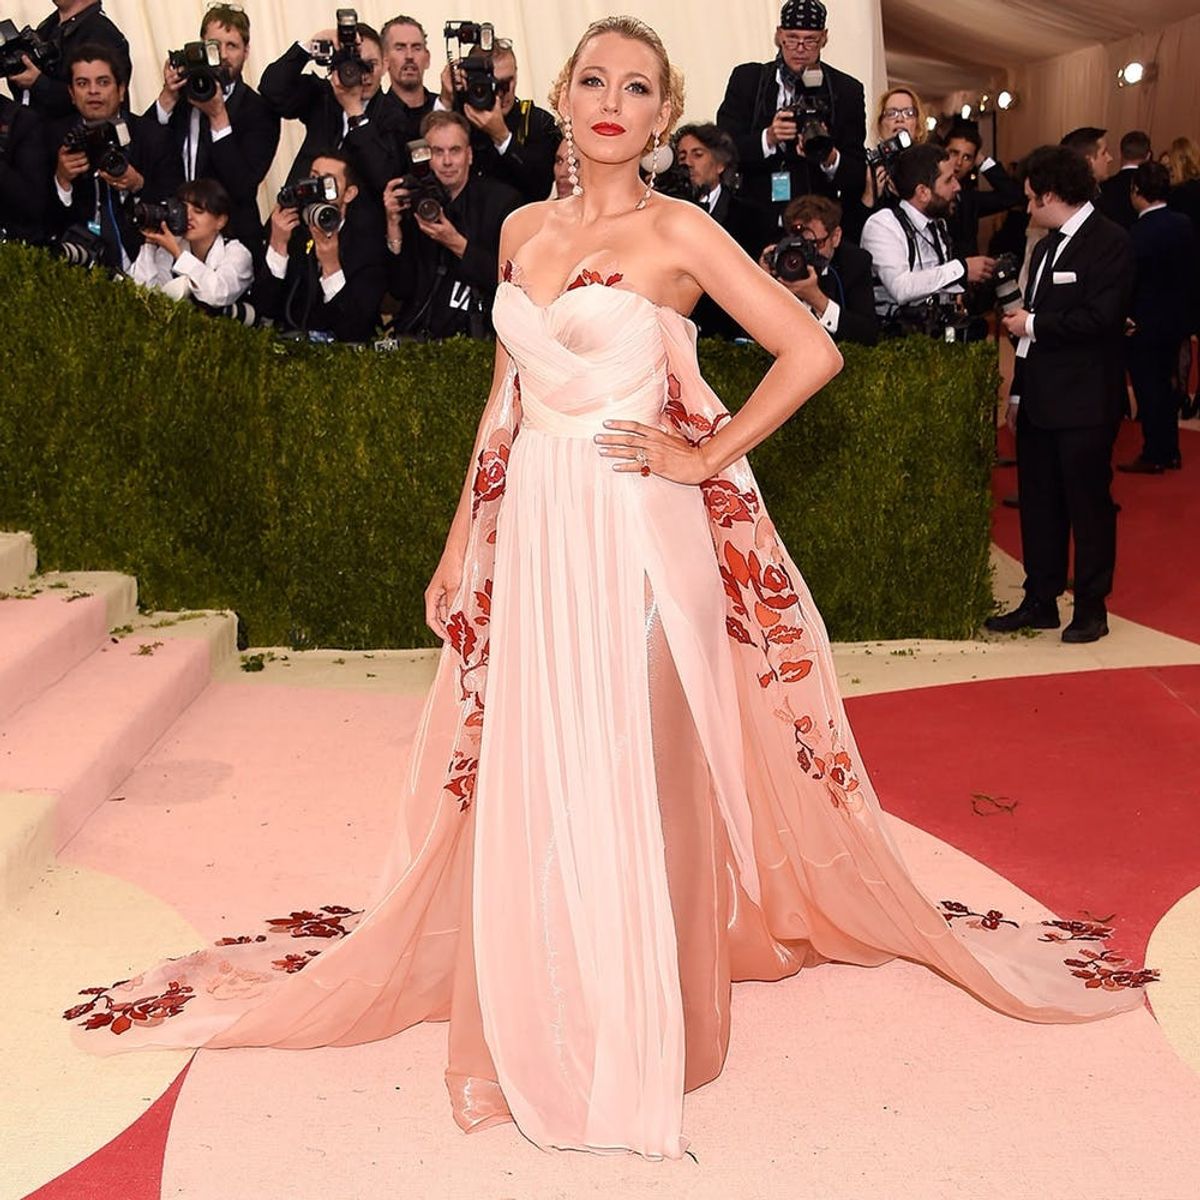 See Which Two Celebs Proved + Debunked Their Baby Rumors at This Year’s Met Gala